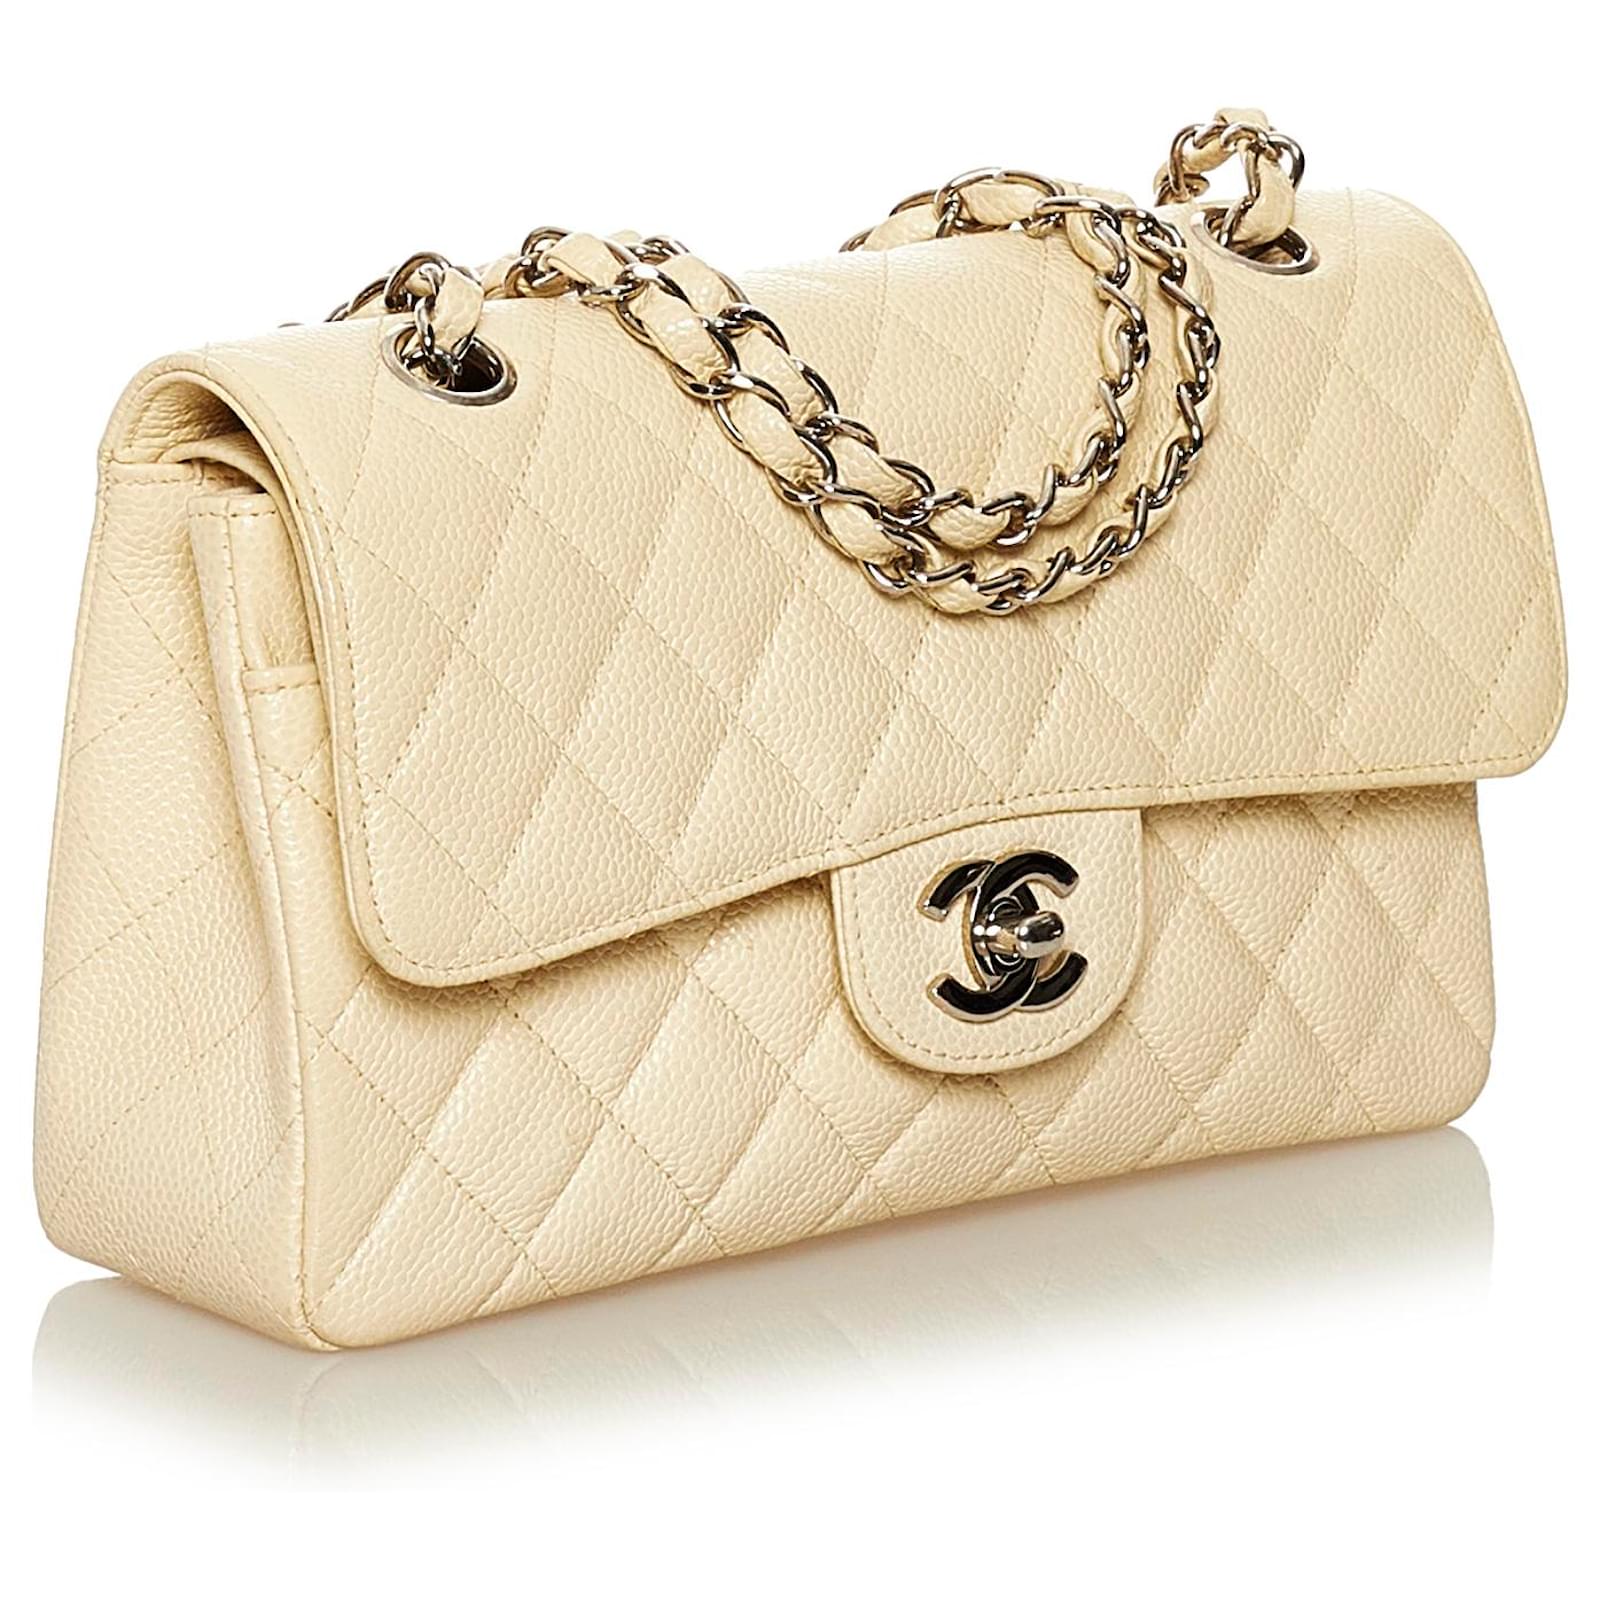 Chanel Yellow Small Classic Caviar Leather Double Flap Bag Beige